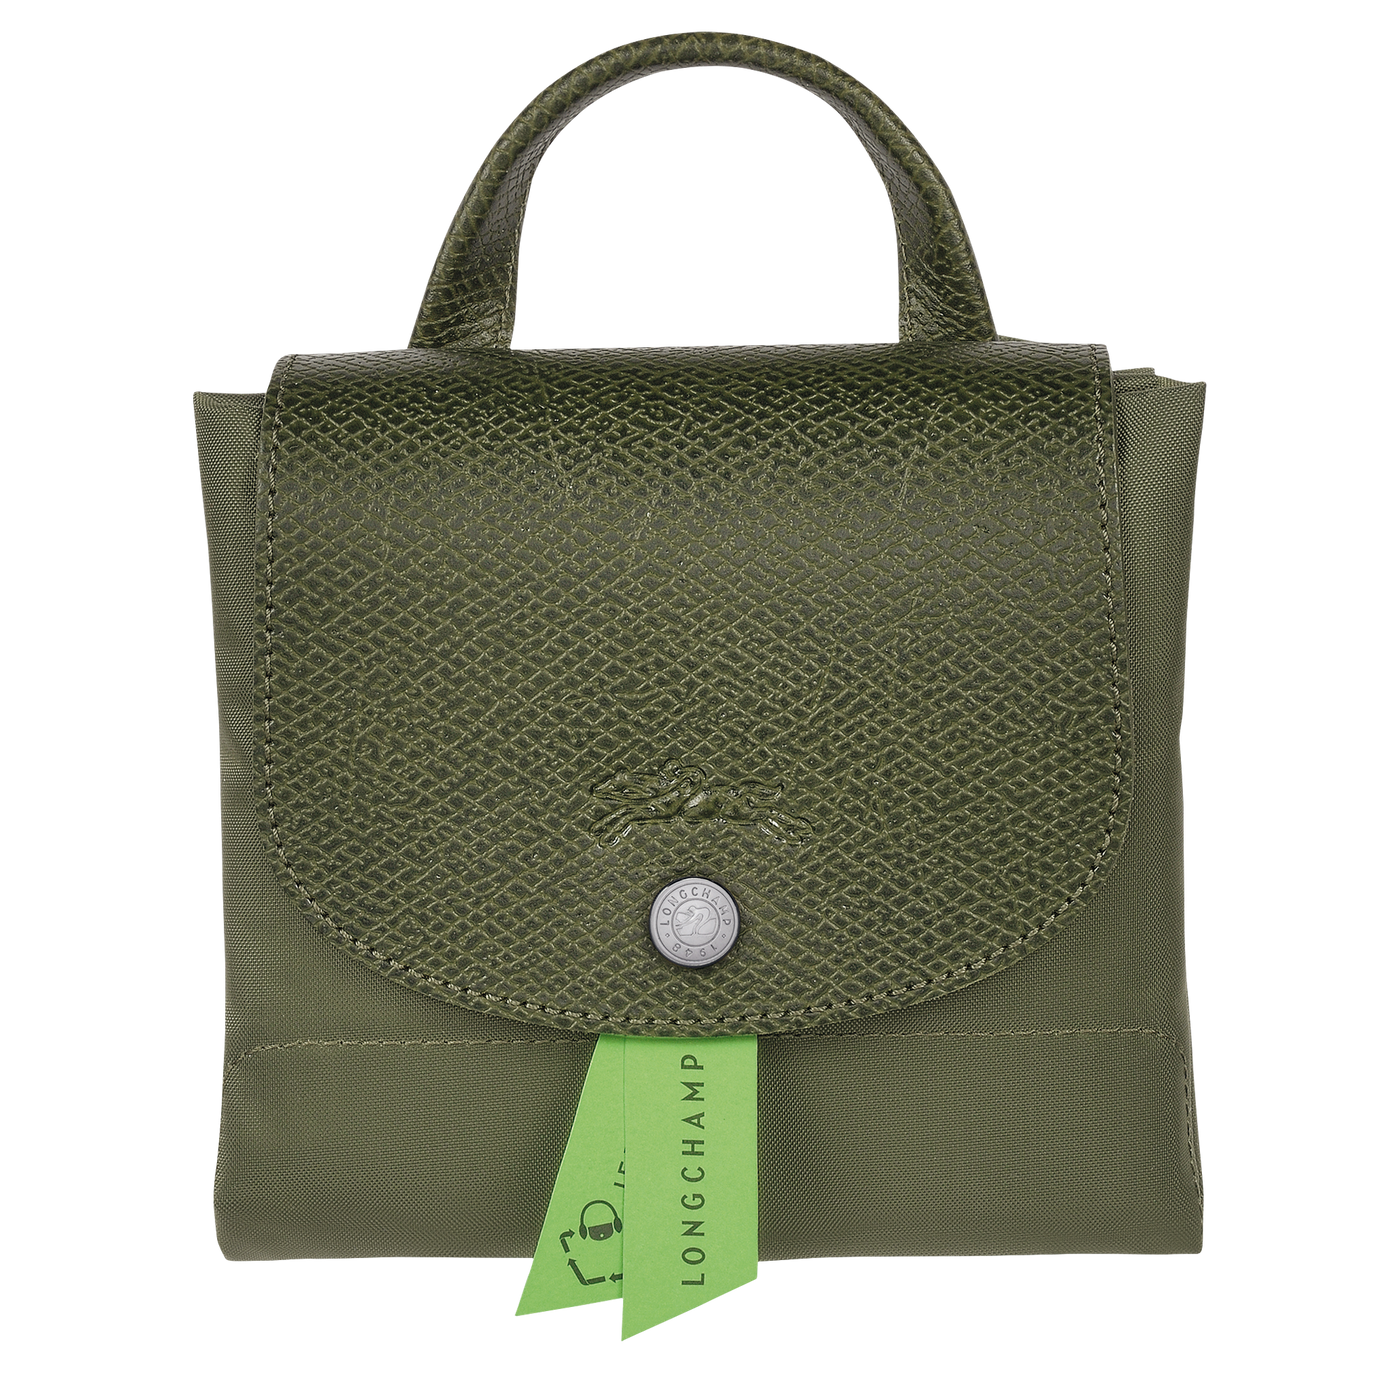 Le Pliage Green Backpack  - 1699919